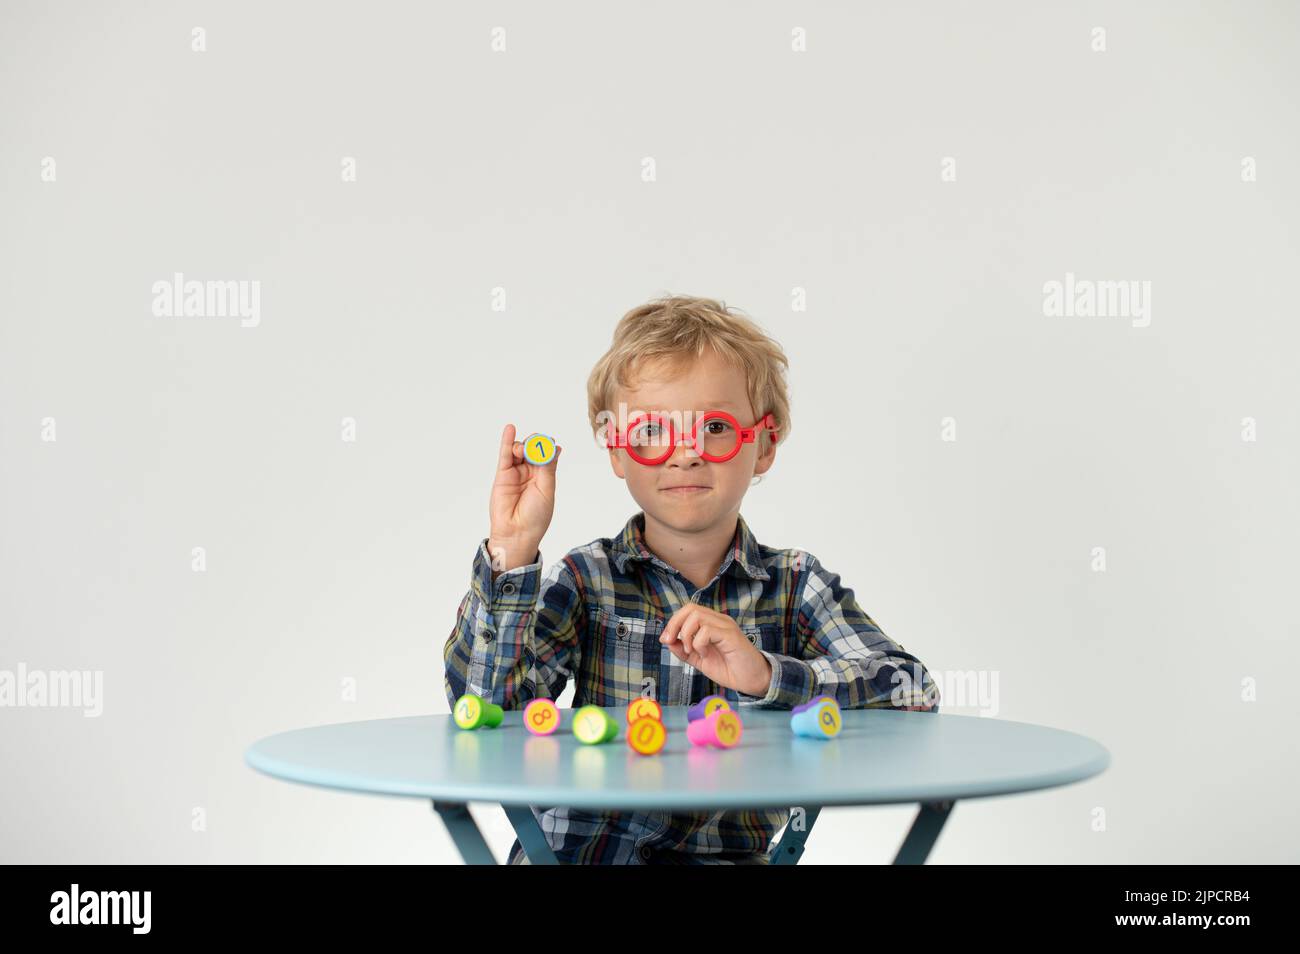 Boy sitting at a table, showing lotto number, school grade Stock Photo